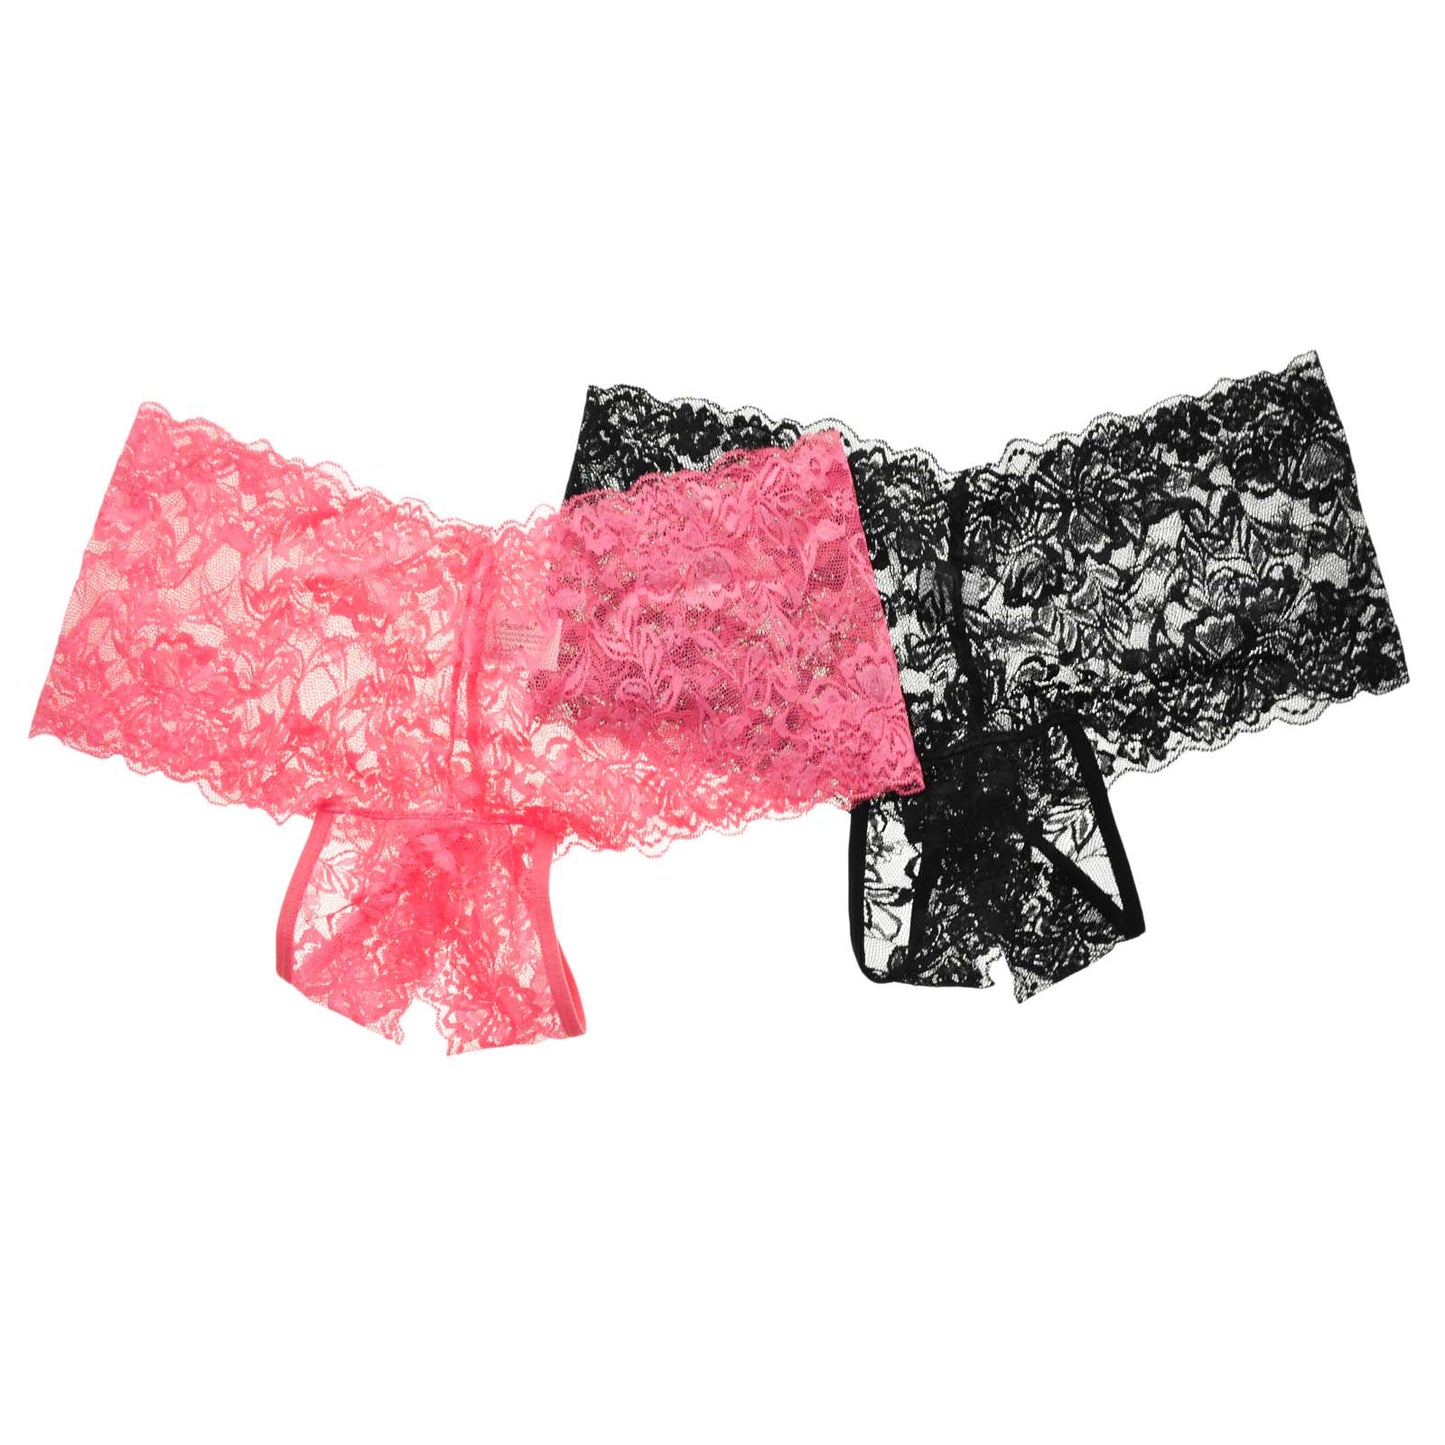 Open-Crotch Cheeky Boxers with Floral Lace Design (2-Pack)